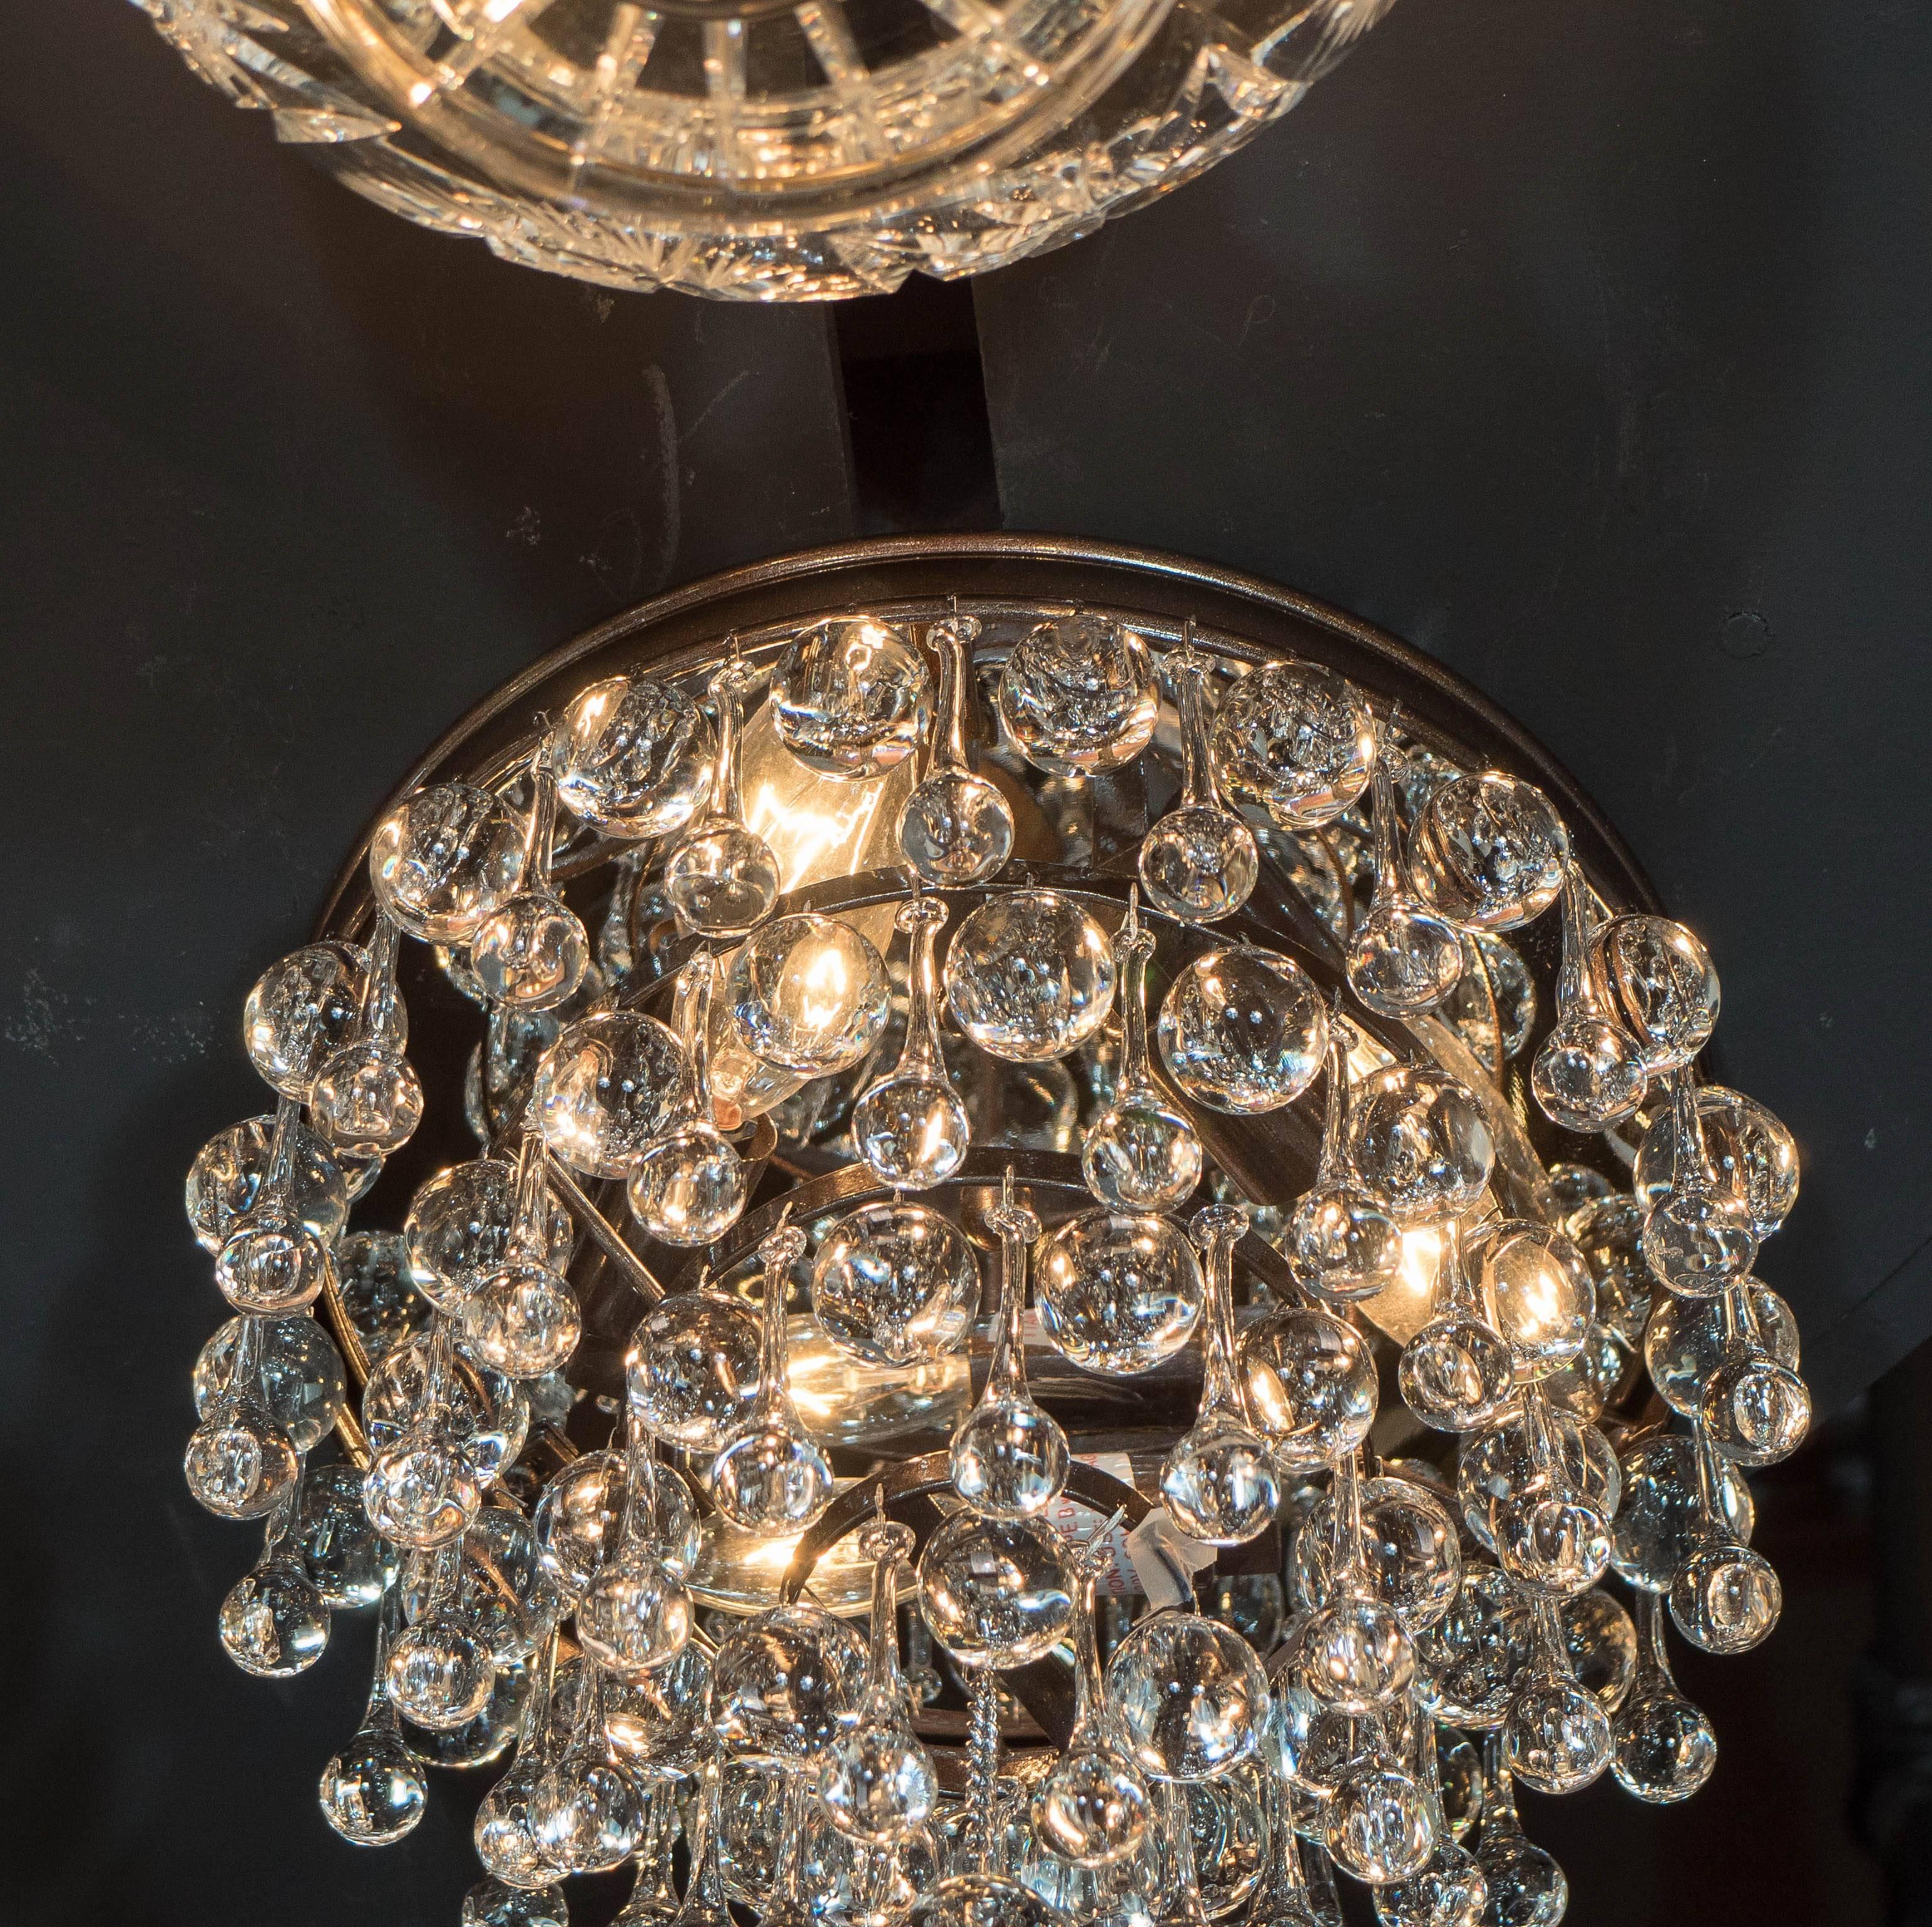 American Hollywood Teardrop and Crystal Ball Chandelier with Chrome and Handblown Glass